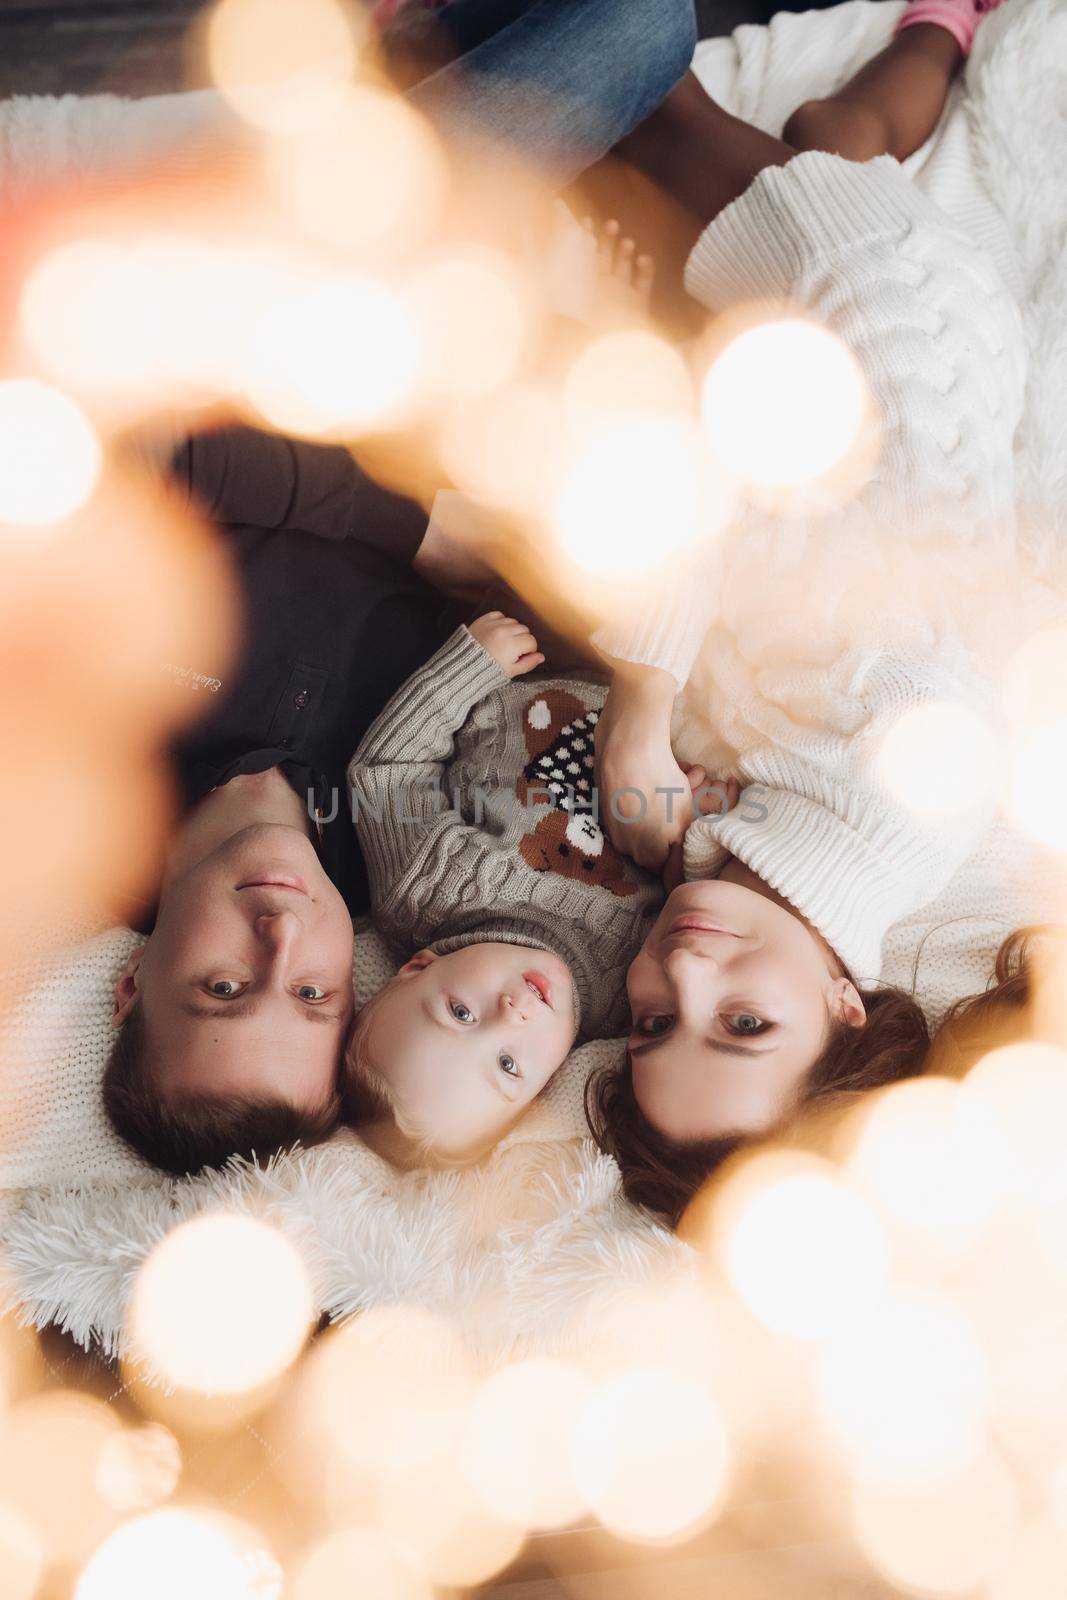 Upside down photo of a lovely little family laying down together under the Christmas lights